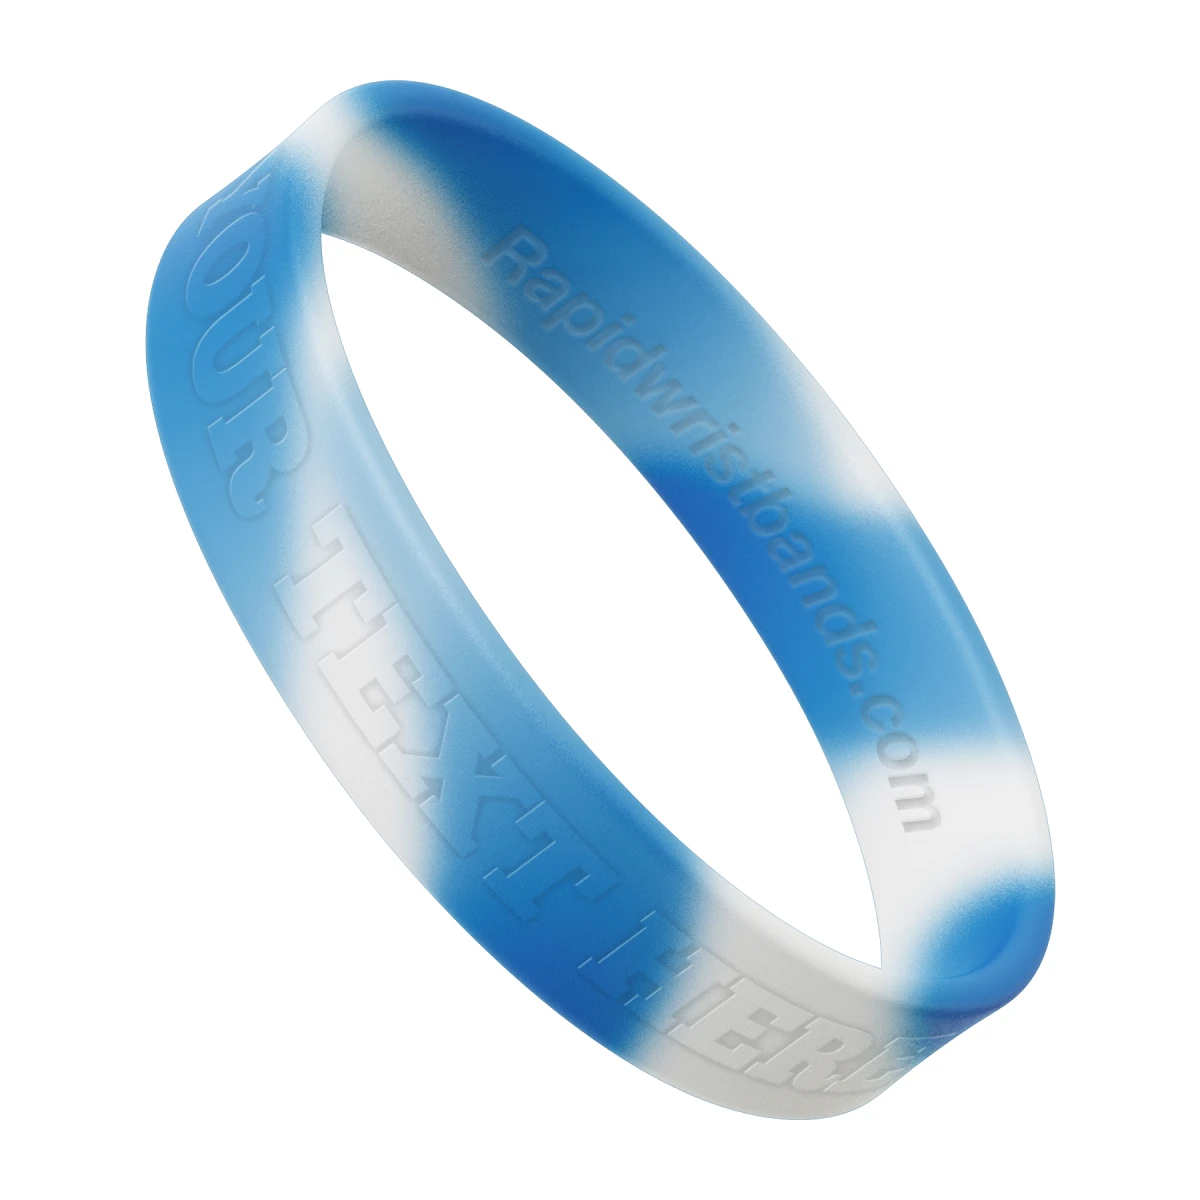 Swirl Blue/White Wristband With Your Text Here Embossed